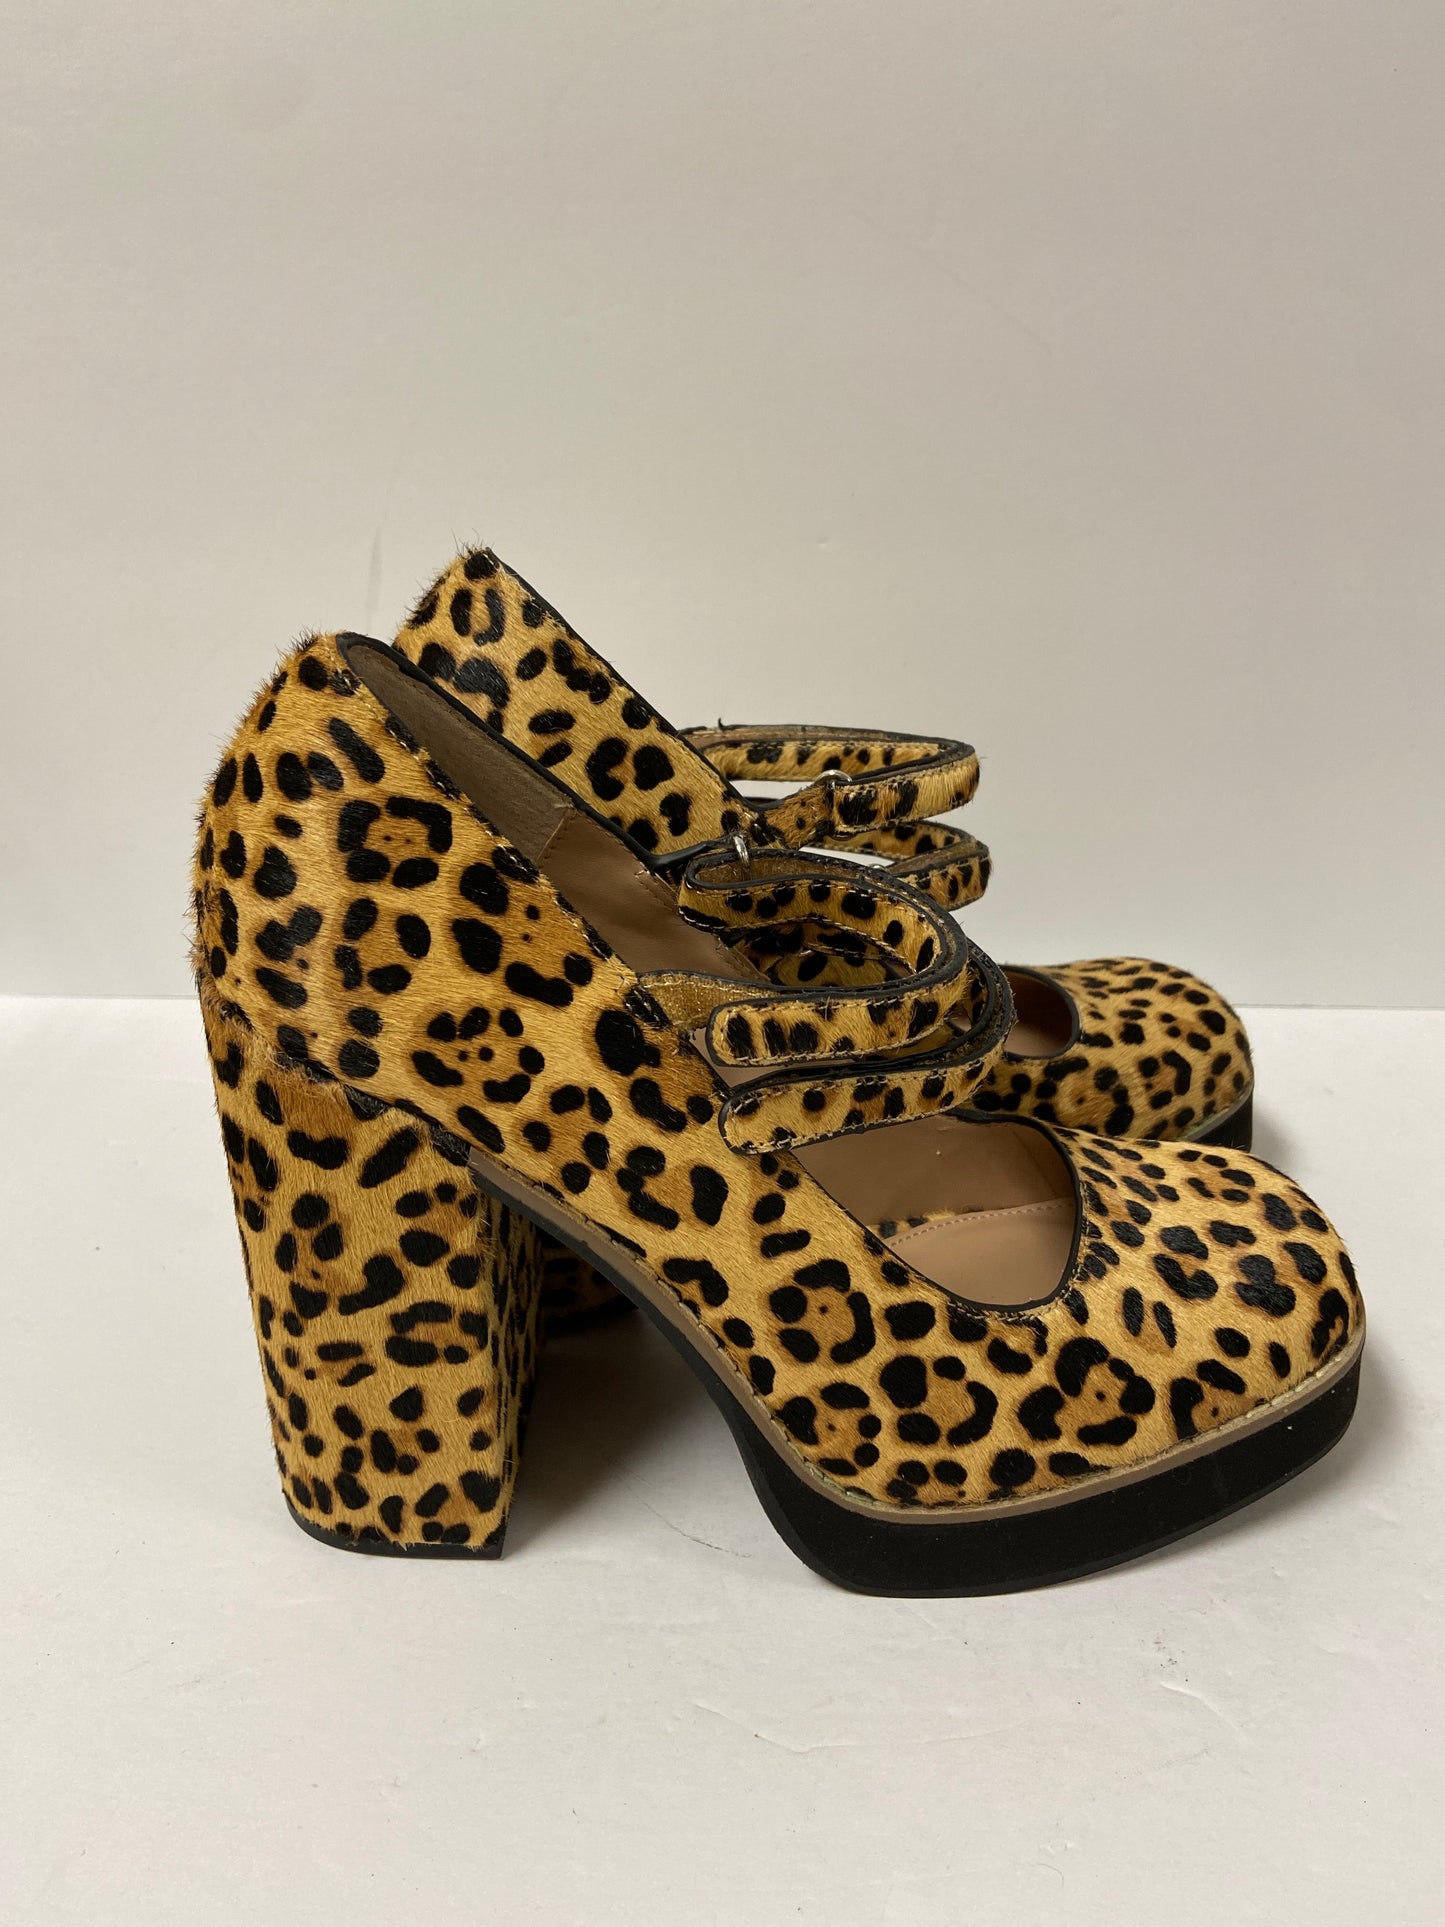 Shoes Heels Block By Steve Madden  Size: 8.5